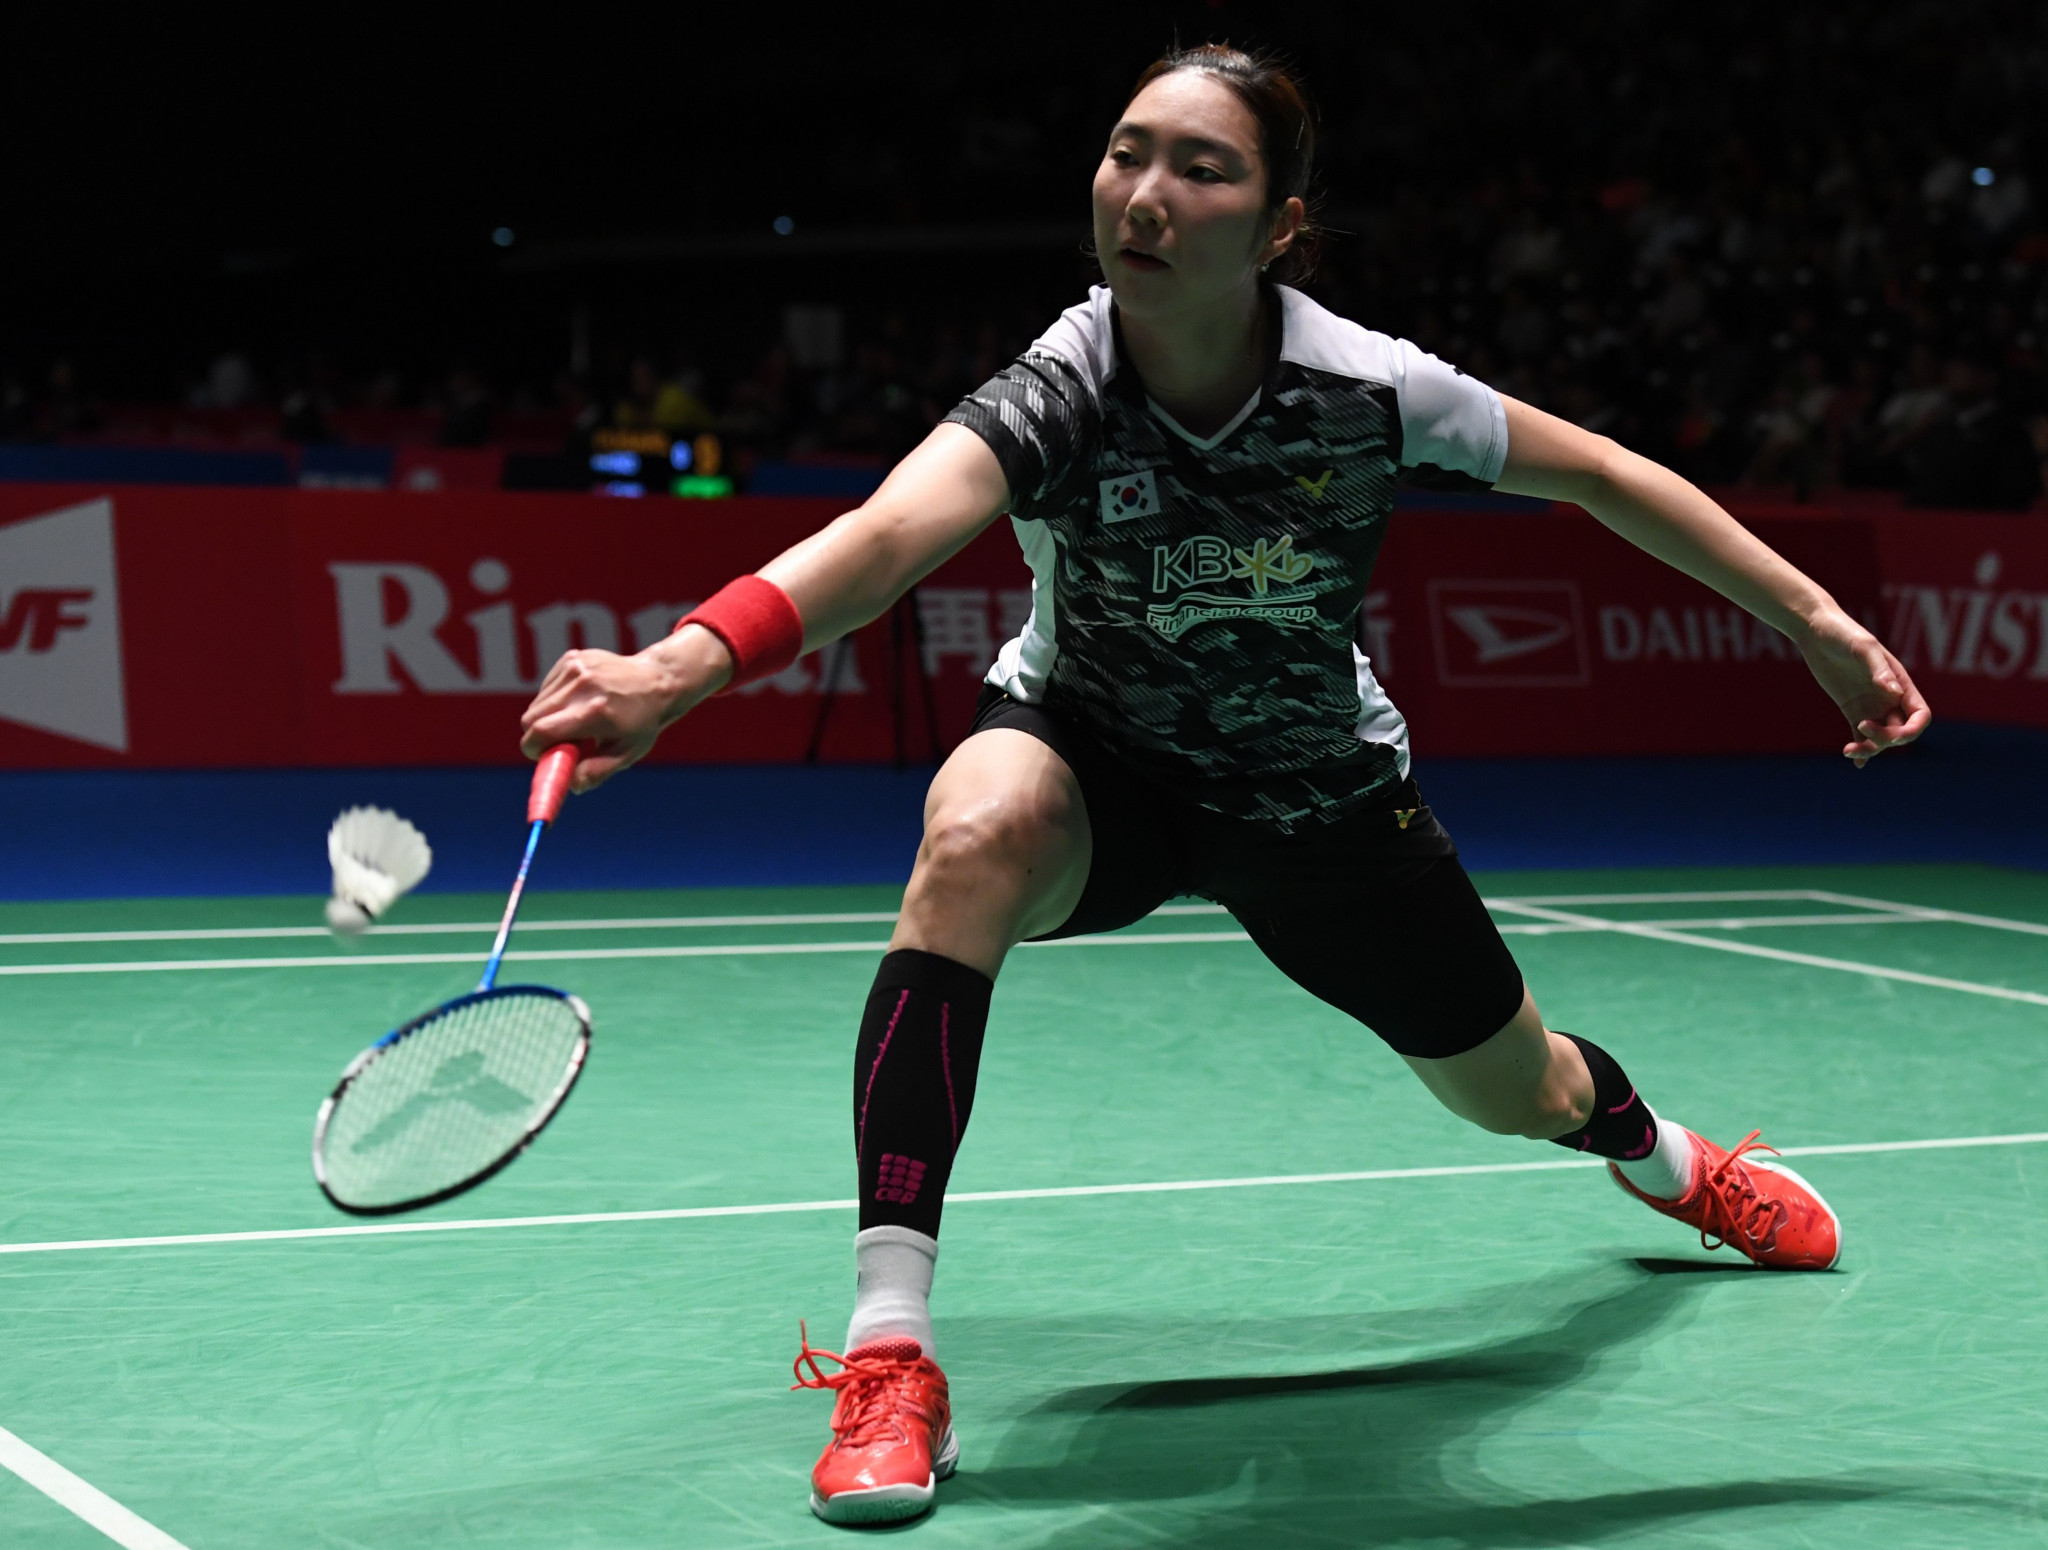 Home favourite Sung Ji Hyun’s hopes of claiming a fourth women’s singles title at the Badminton World Federation Korea Masters have come to an end ©Getty Images